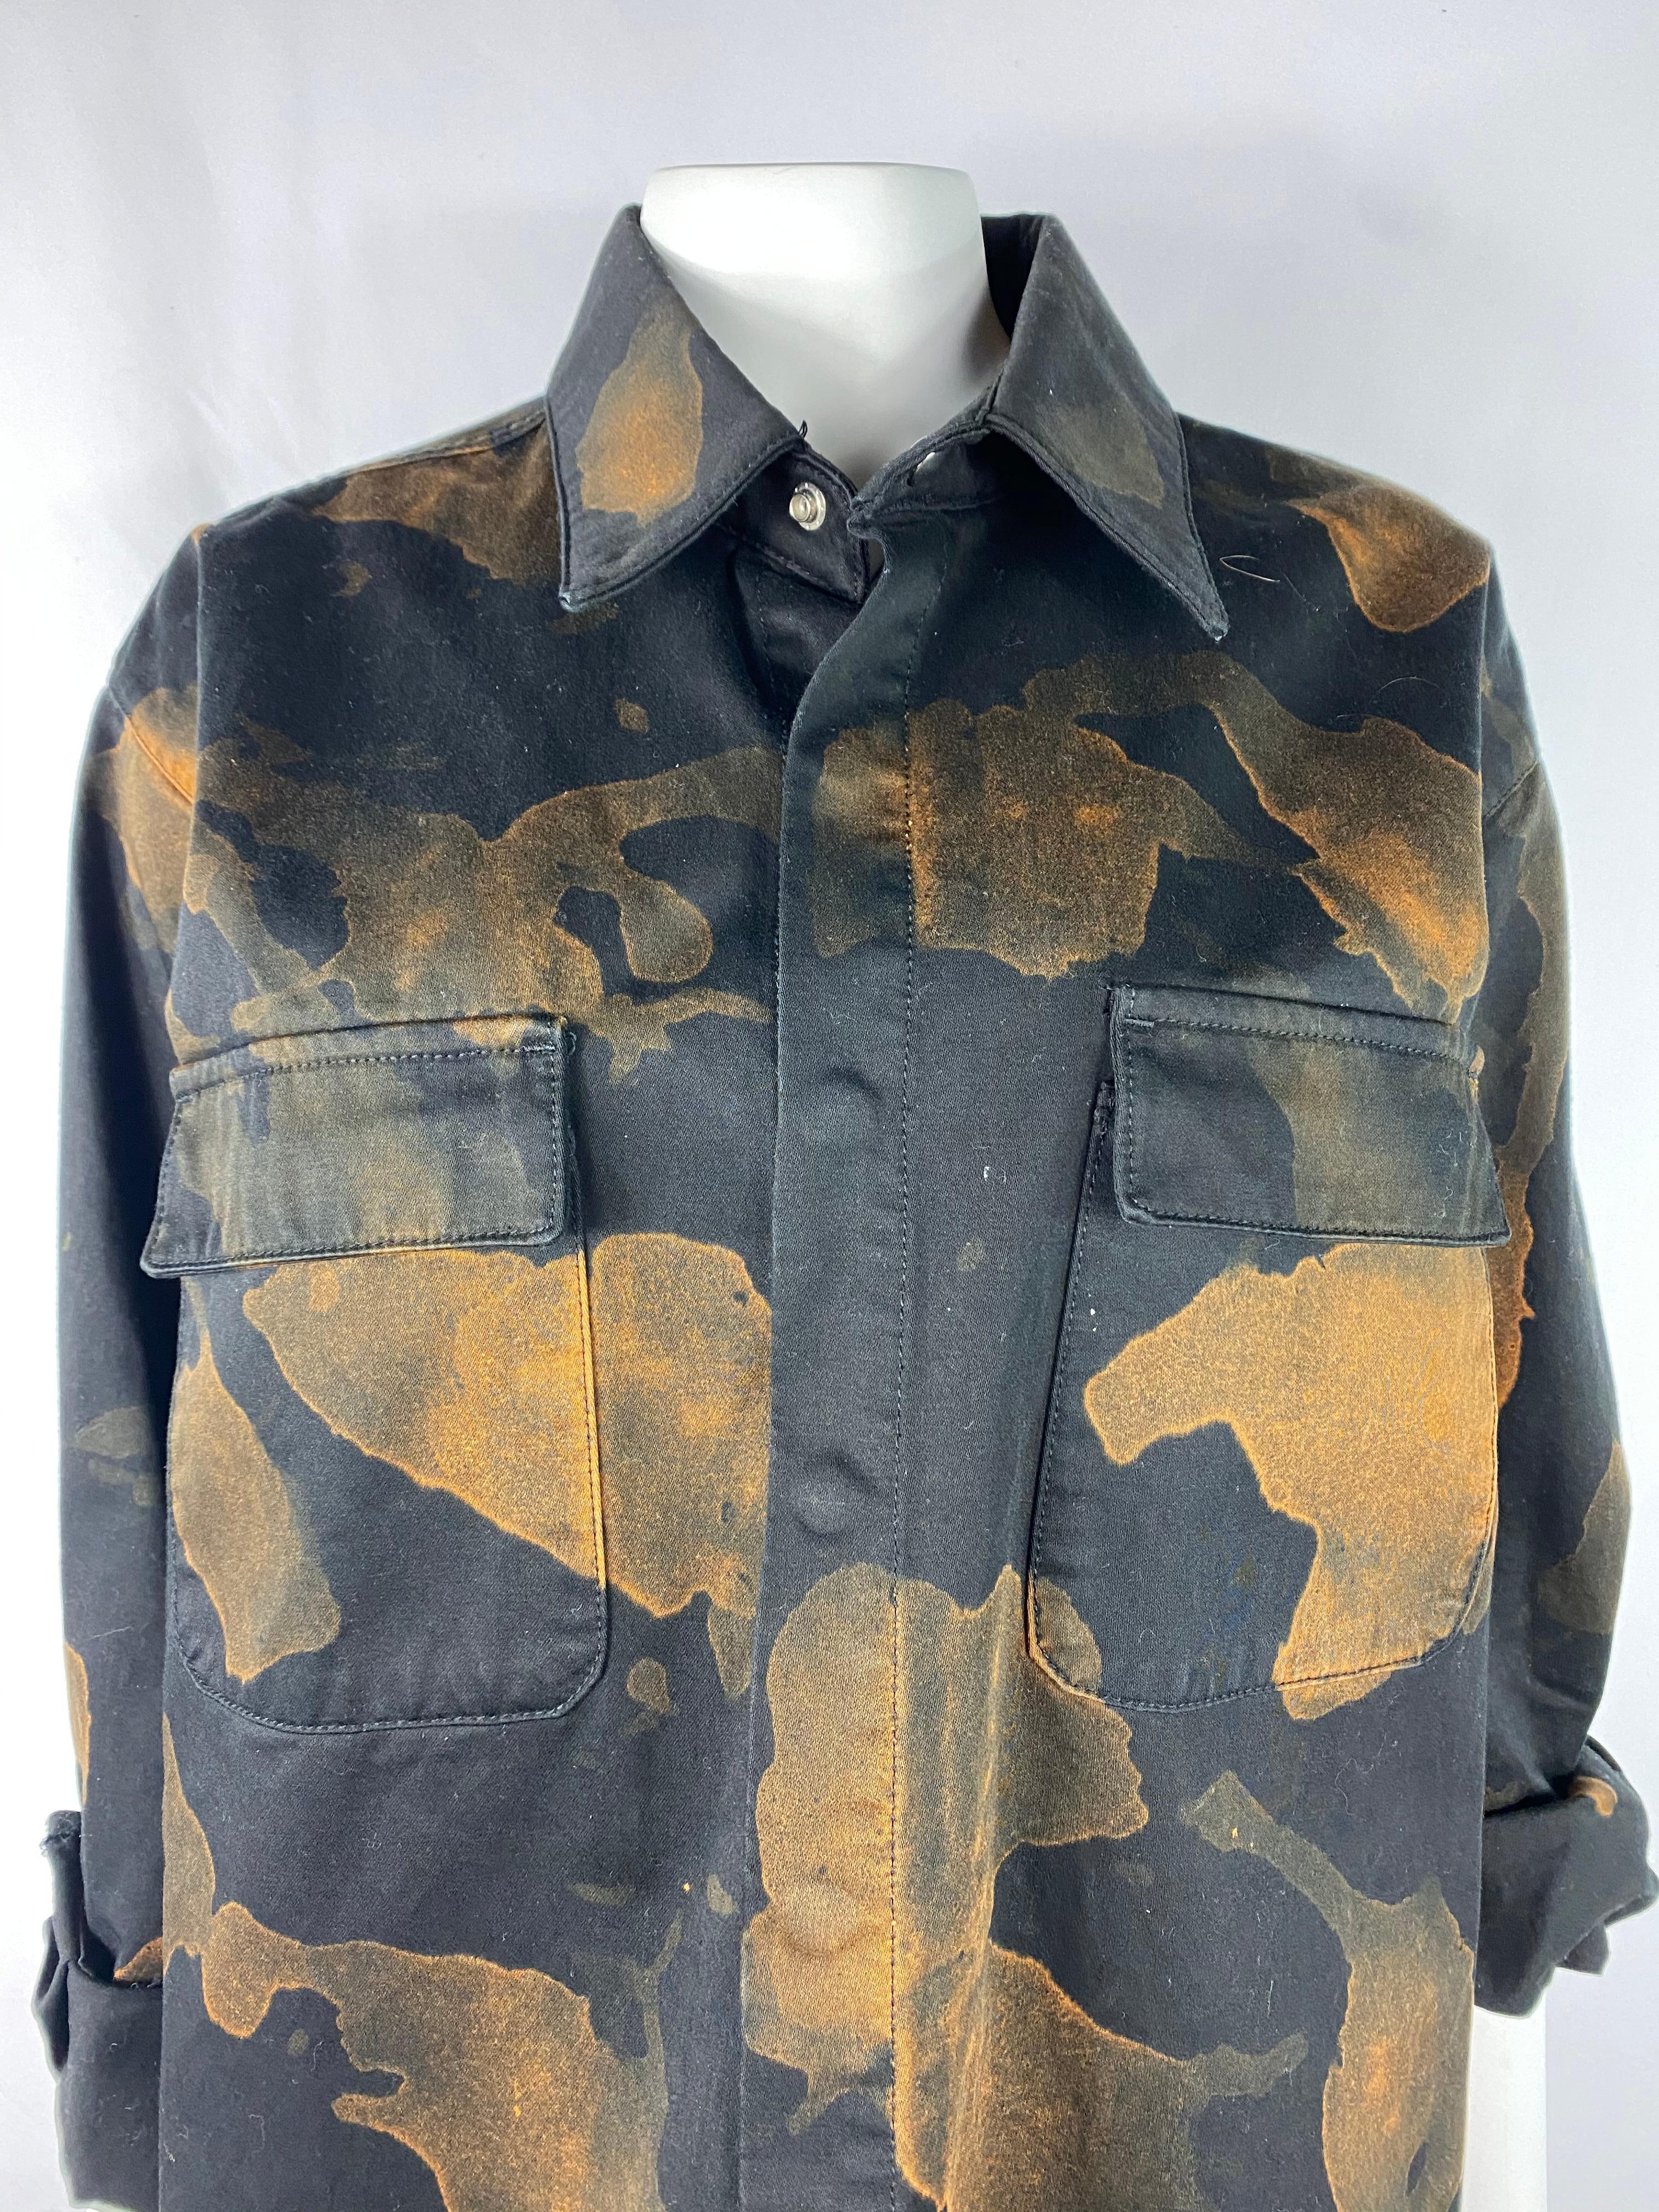 Product details:

Featuring 100% cotton black button down shirt with brown/ yellow abstract print, collar and dual front pocket detail. Oversized fit.